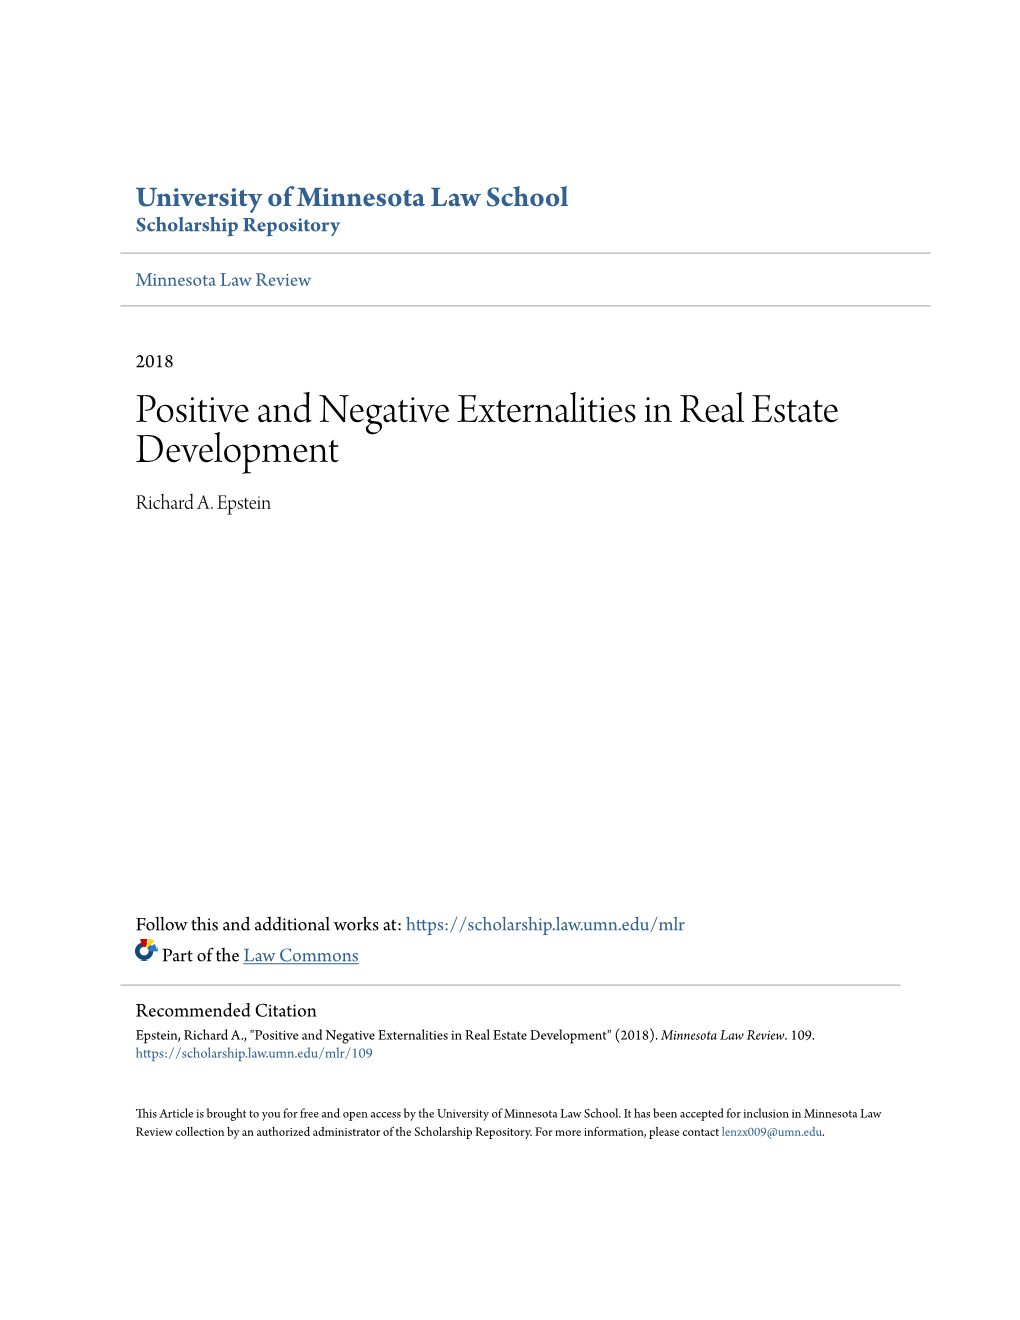 Positive and Negative Externalities in Real Estate Development Richard A